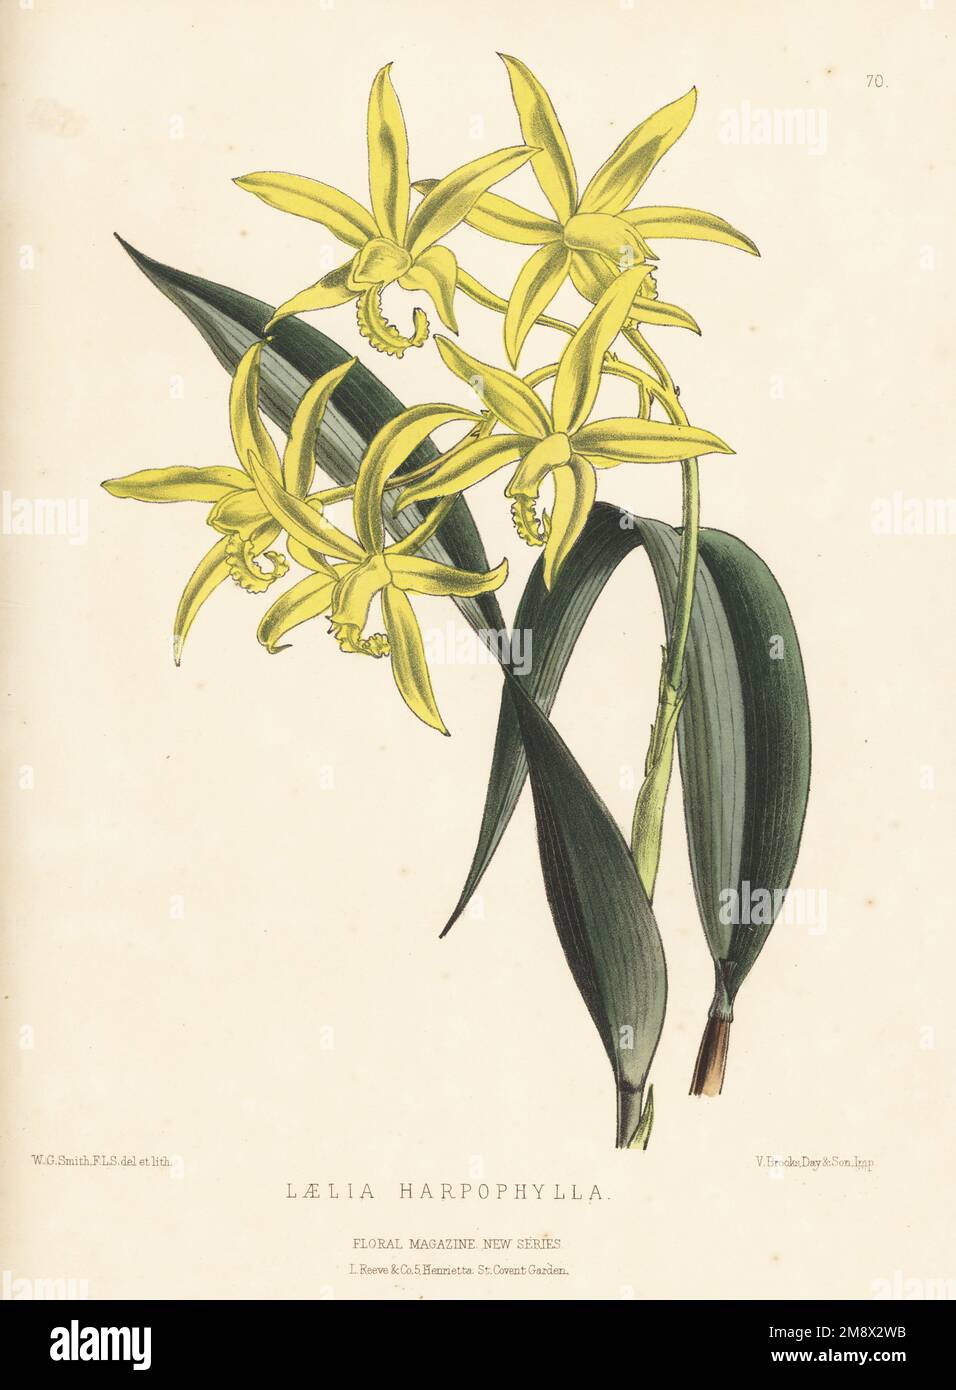 Cattleya harpophylla orchid. As Laelia harpophylla, native of Brazil, exhibited by Veitch and Sons of Chelsea as Laelia cinnabarina. Handcolored botanical illustration drawn and lithographed by Worthington George Smith from Henry Honywood Dombrain's Floral Magazine, New Series, Volume 2, L. Reeve, London, 1873. Lithograph printed  by Vincent Brooks, Day & Son. Stock Photo